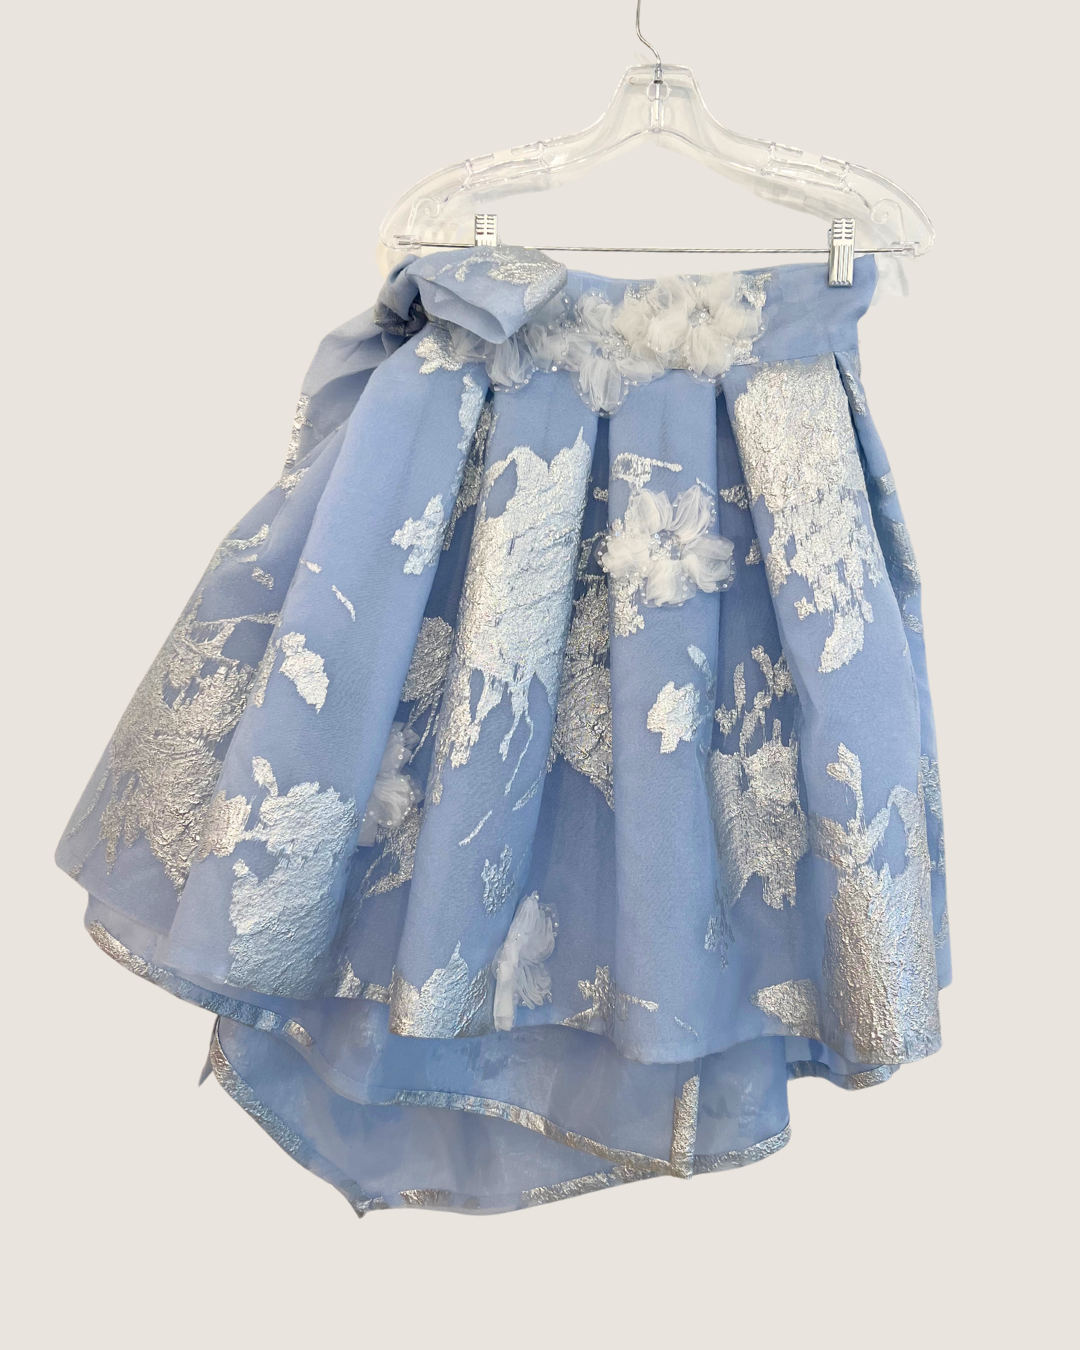 Blue Silk Wrap Skirt with Silver Embellishment